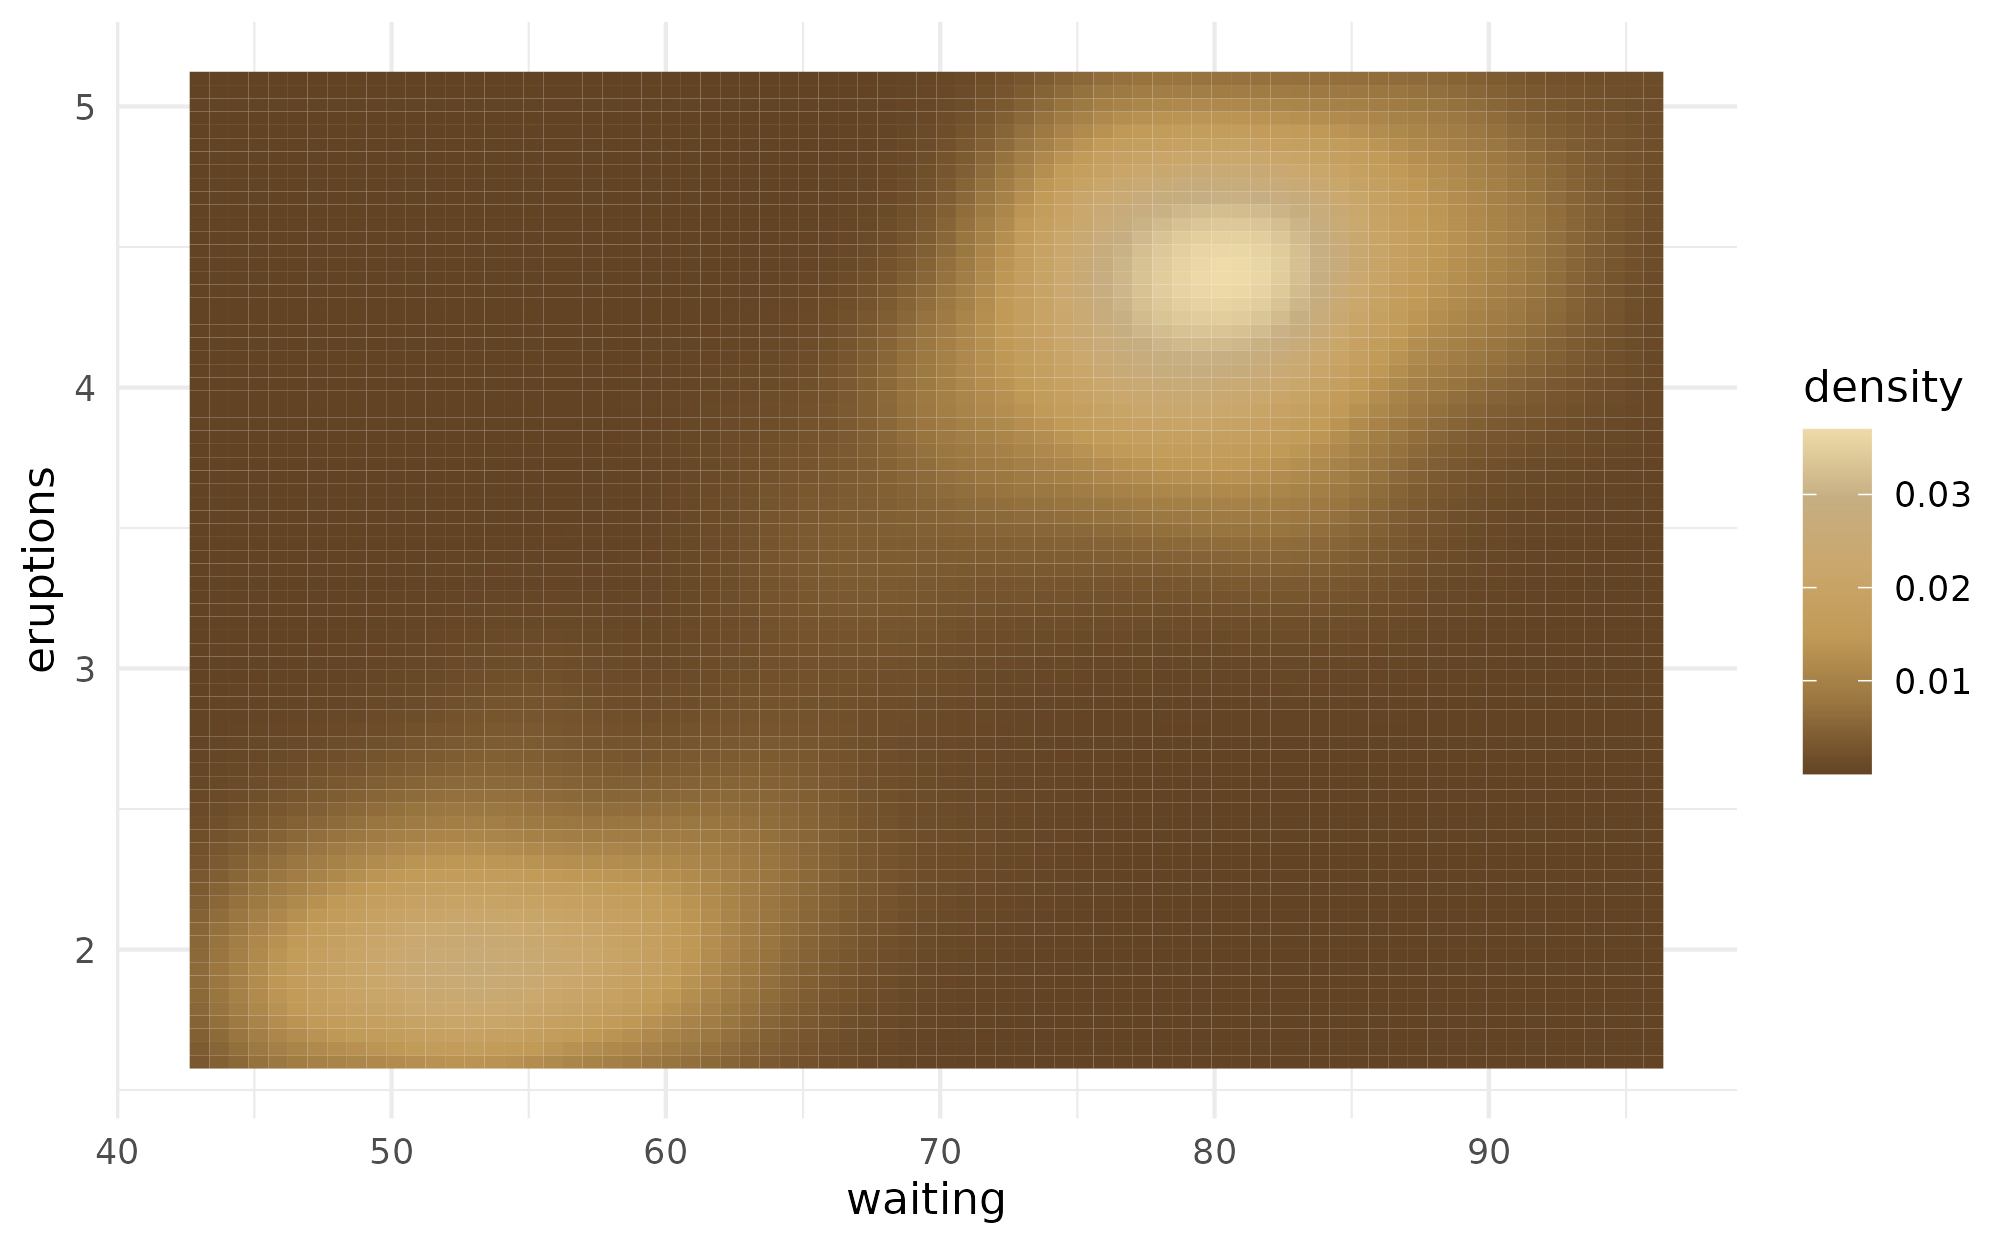 A heatmap showing a positive relationship between the waiting time between eruptions and the length of eruptions at the Old Faithful geyser. The heat map is colored using the palette based on Fearless (Taylor's Version), which moves from a dark golden brown for low density combinations up to bright gold for high density combinations.